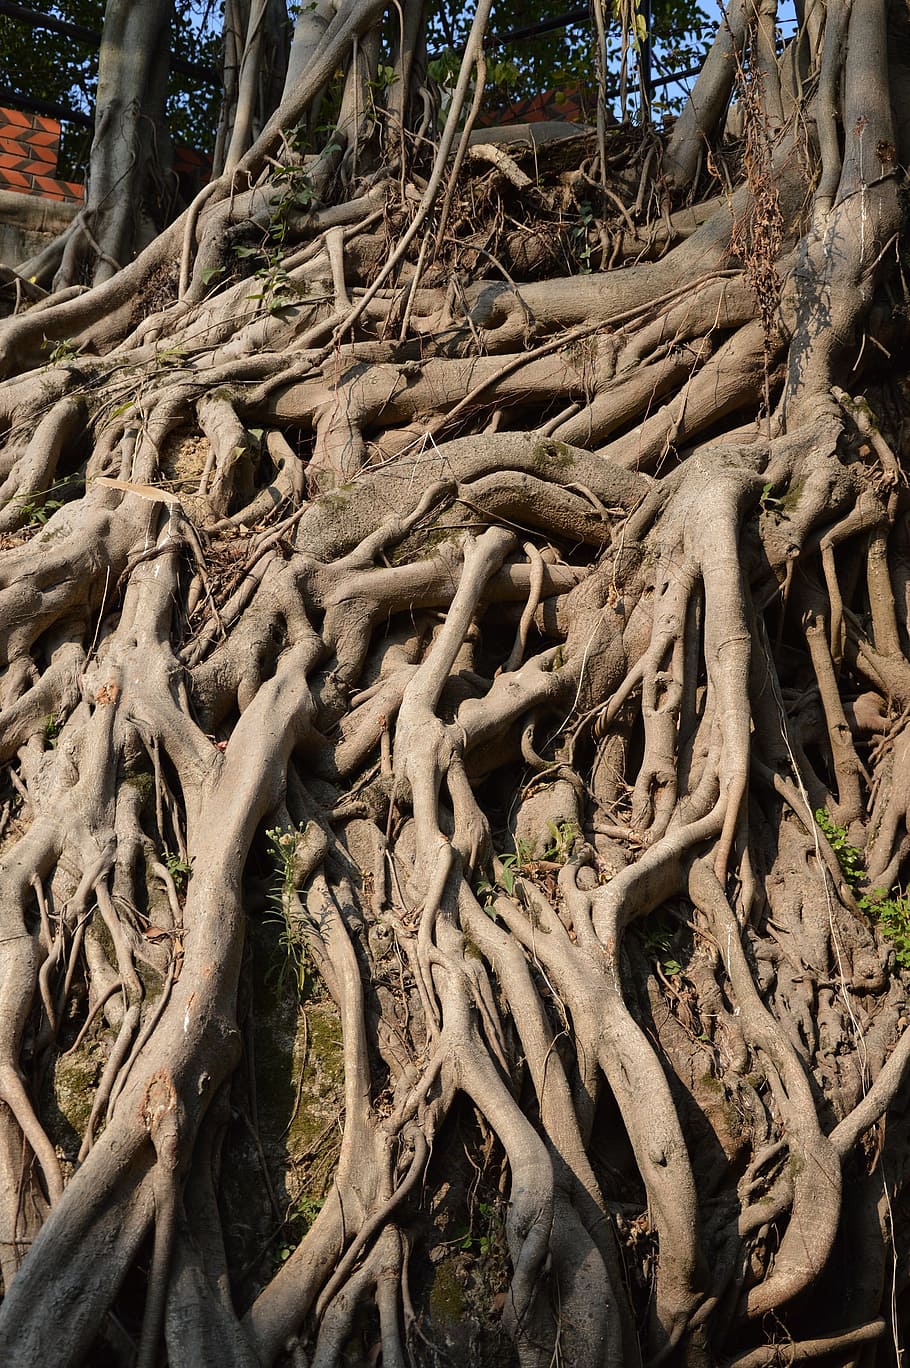 Roots, Trees, Banyan, Ficus, Woods, woody, wooden, growth, growing